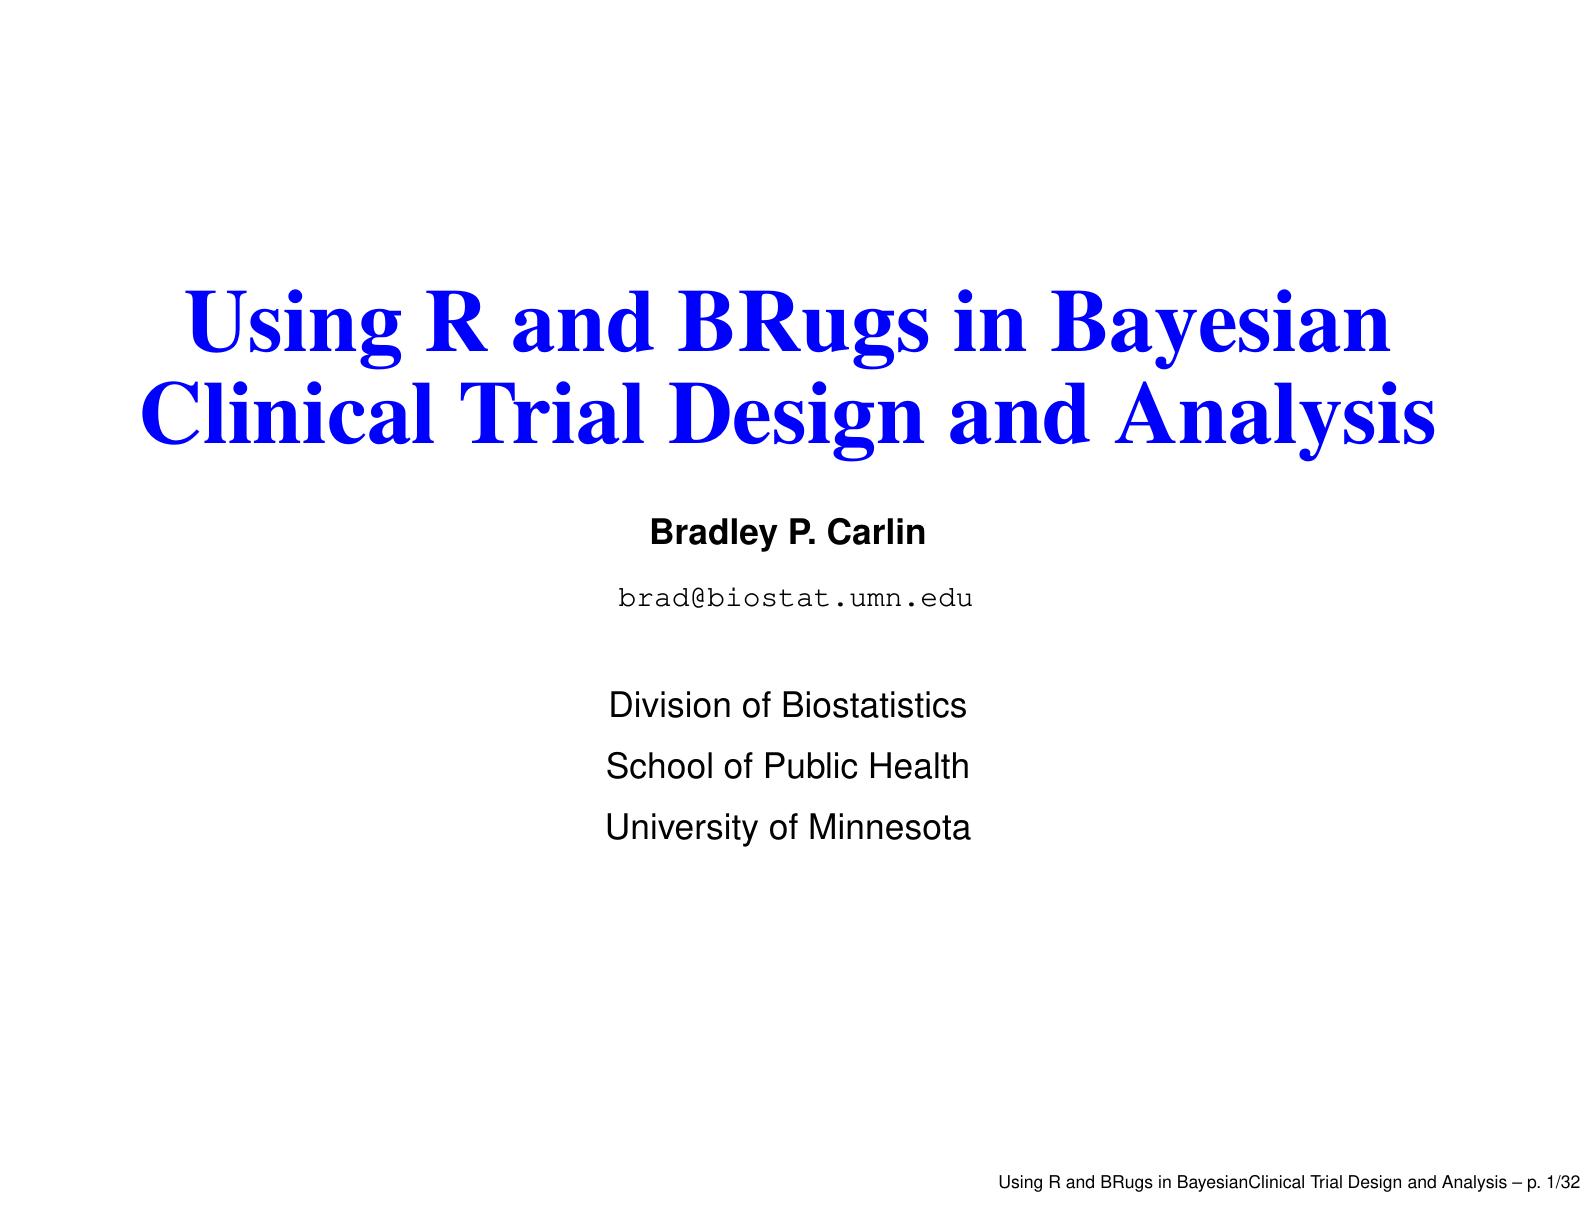 Using R and BRugs in Bayesian analysis for clinical trial